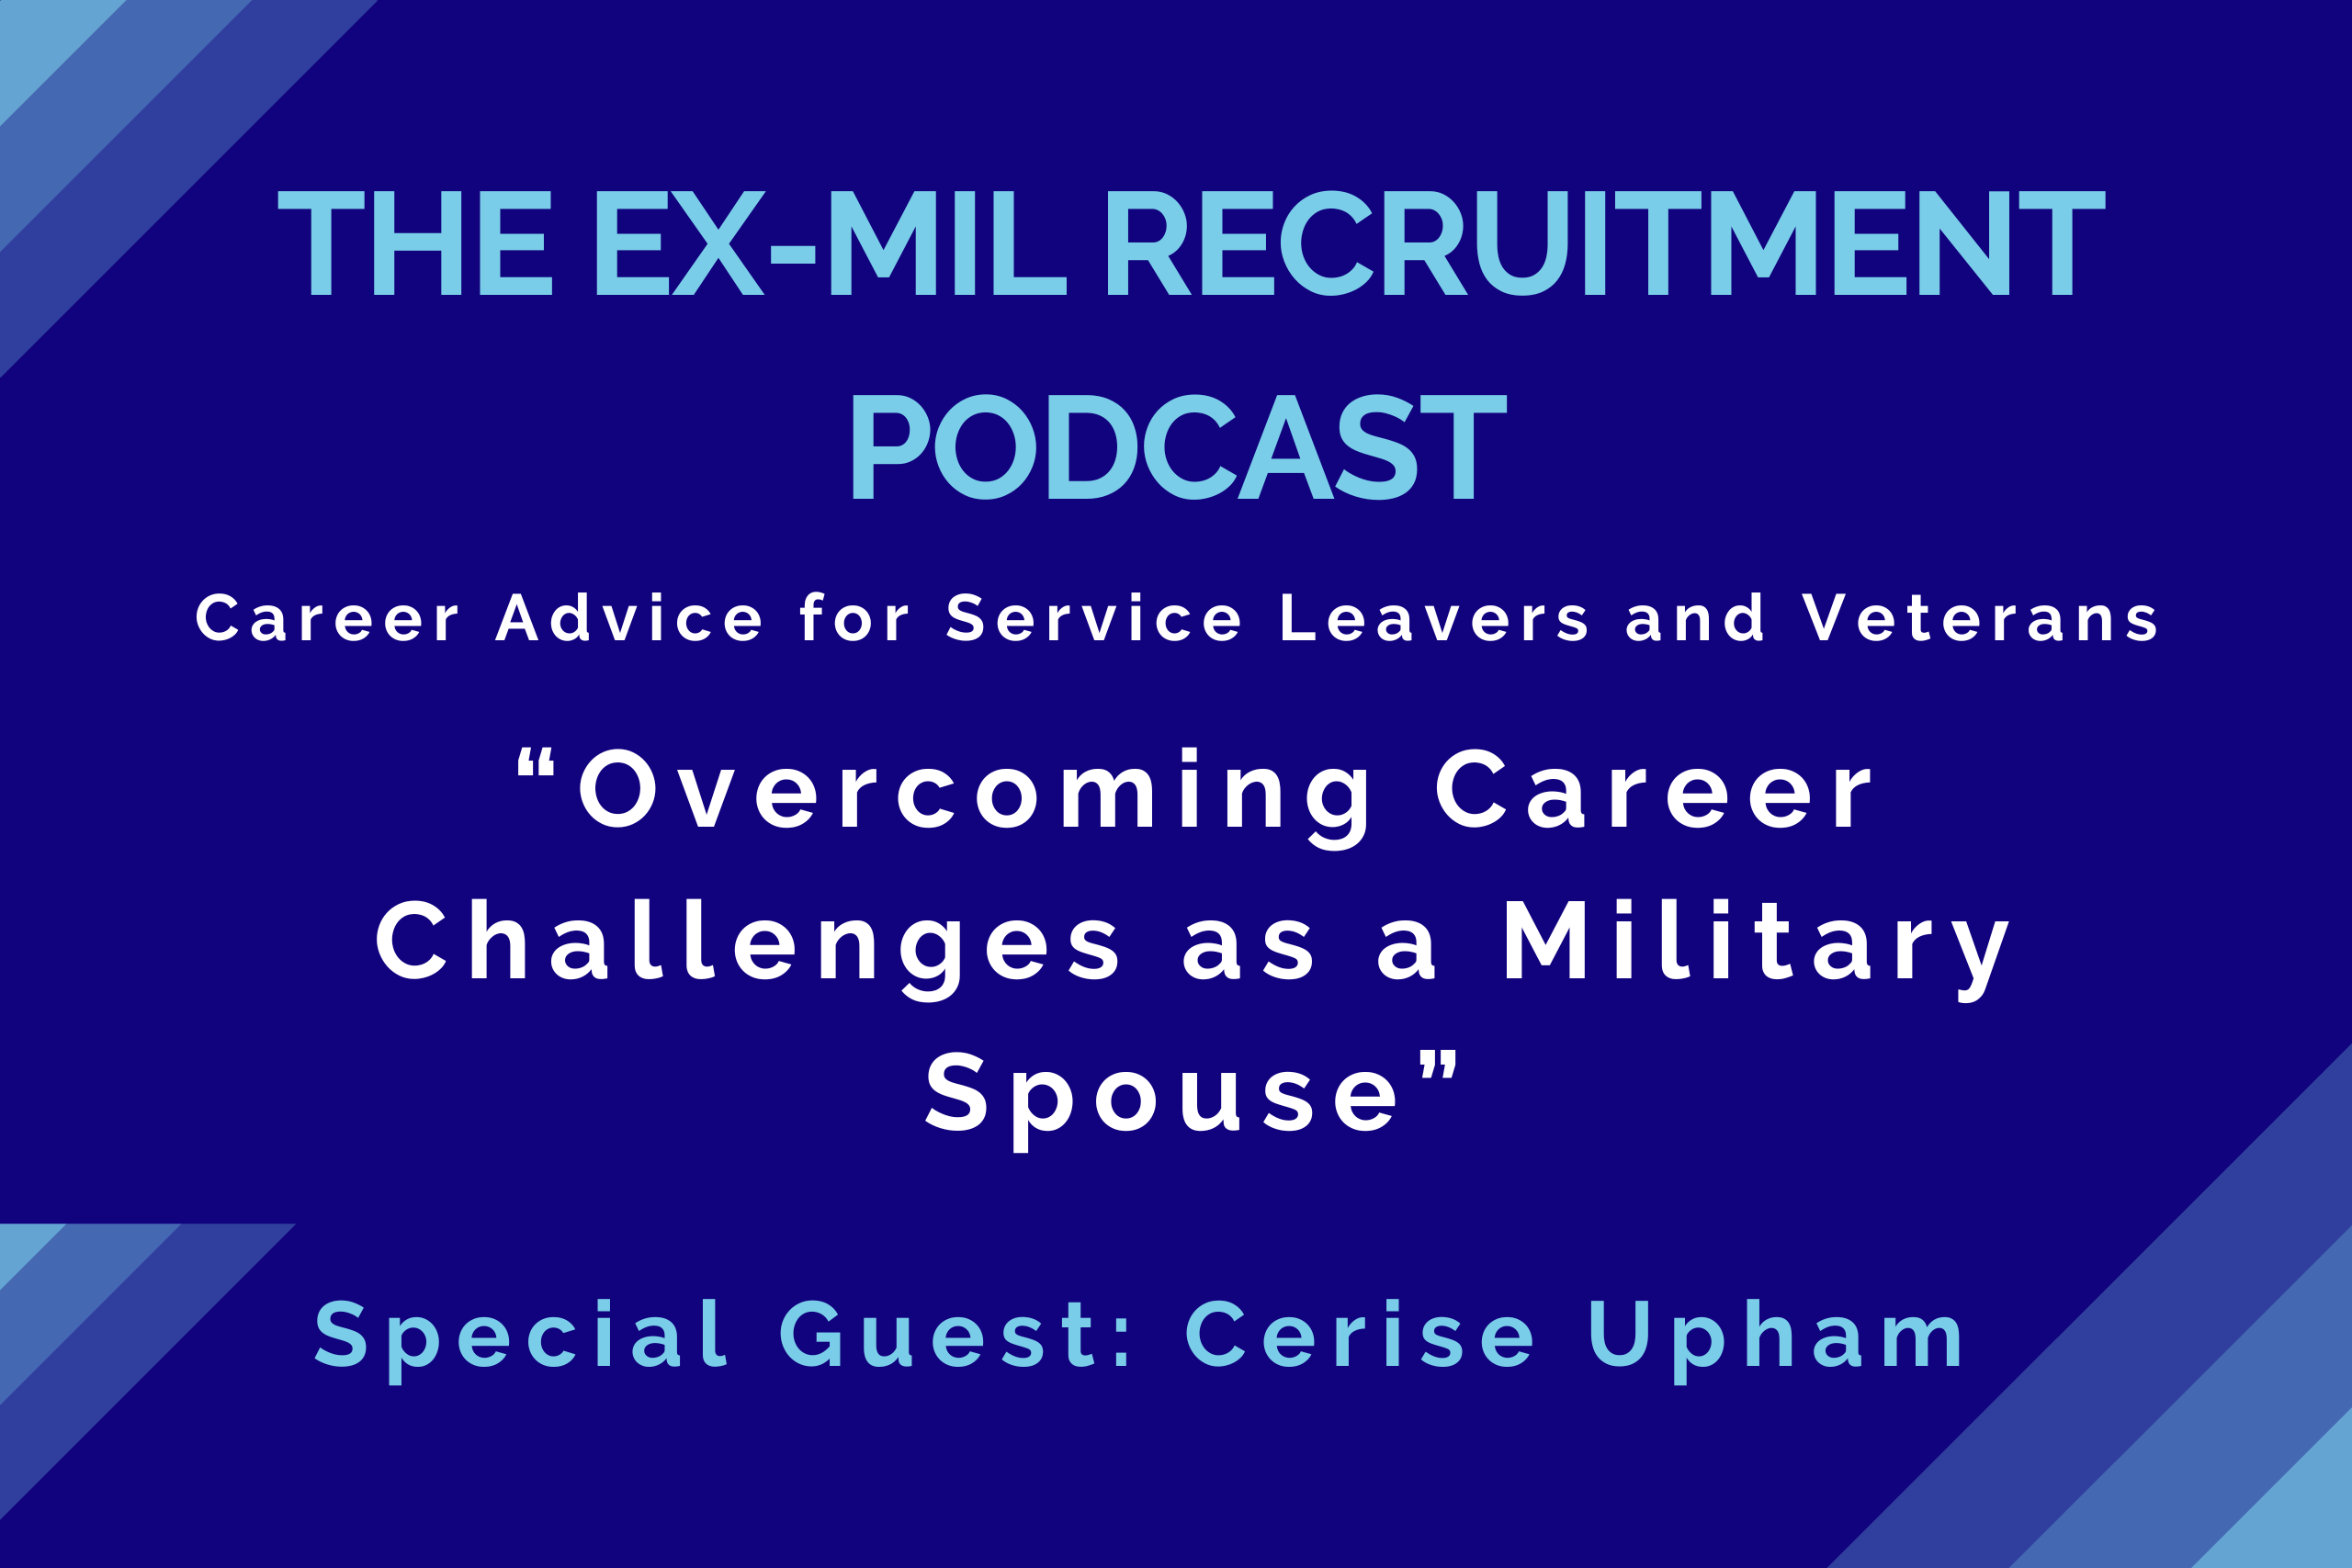 Episode 30 – “Overcoming Career Challenges as a Military Spouse” with Cerise Upham